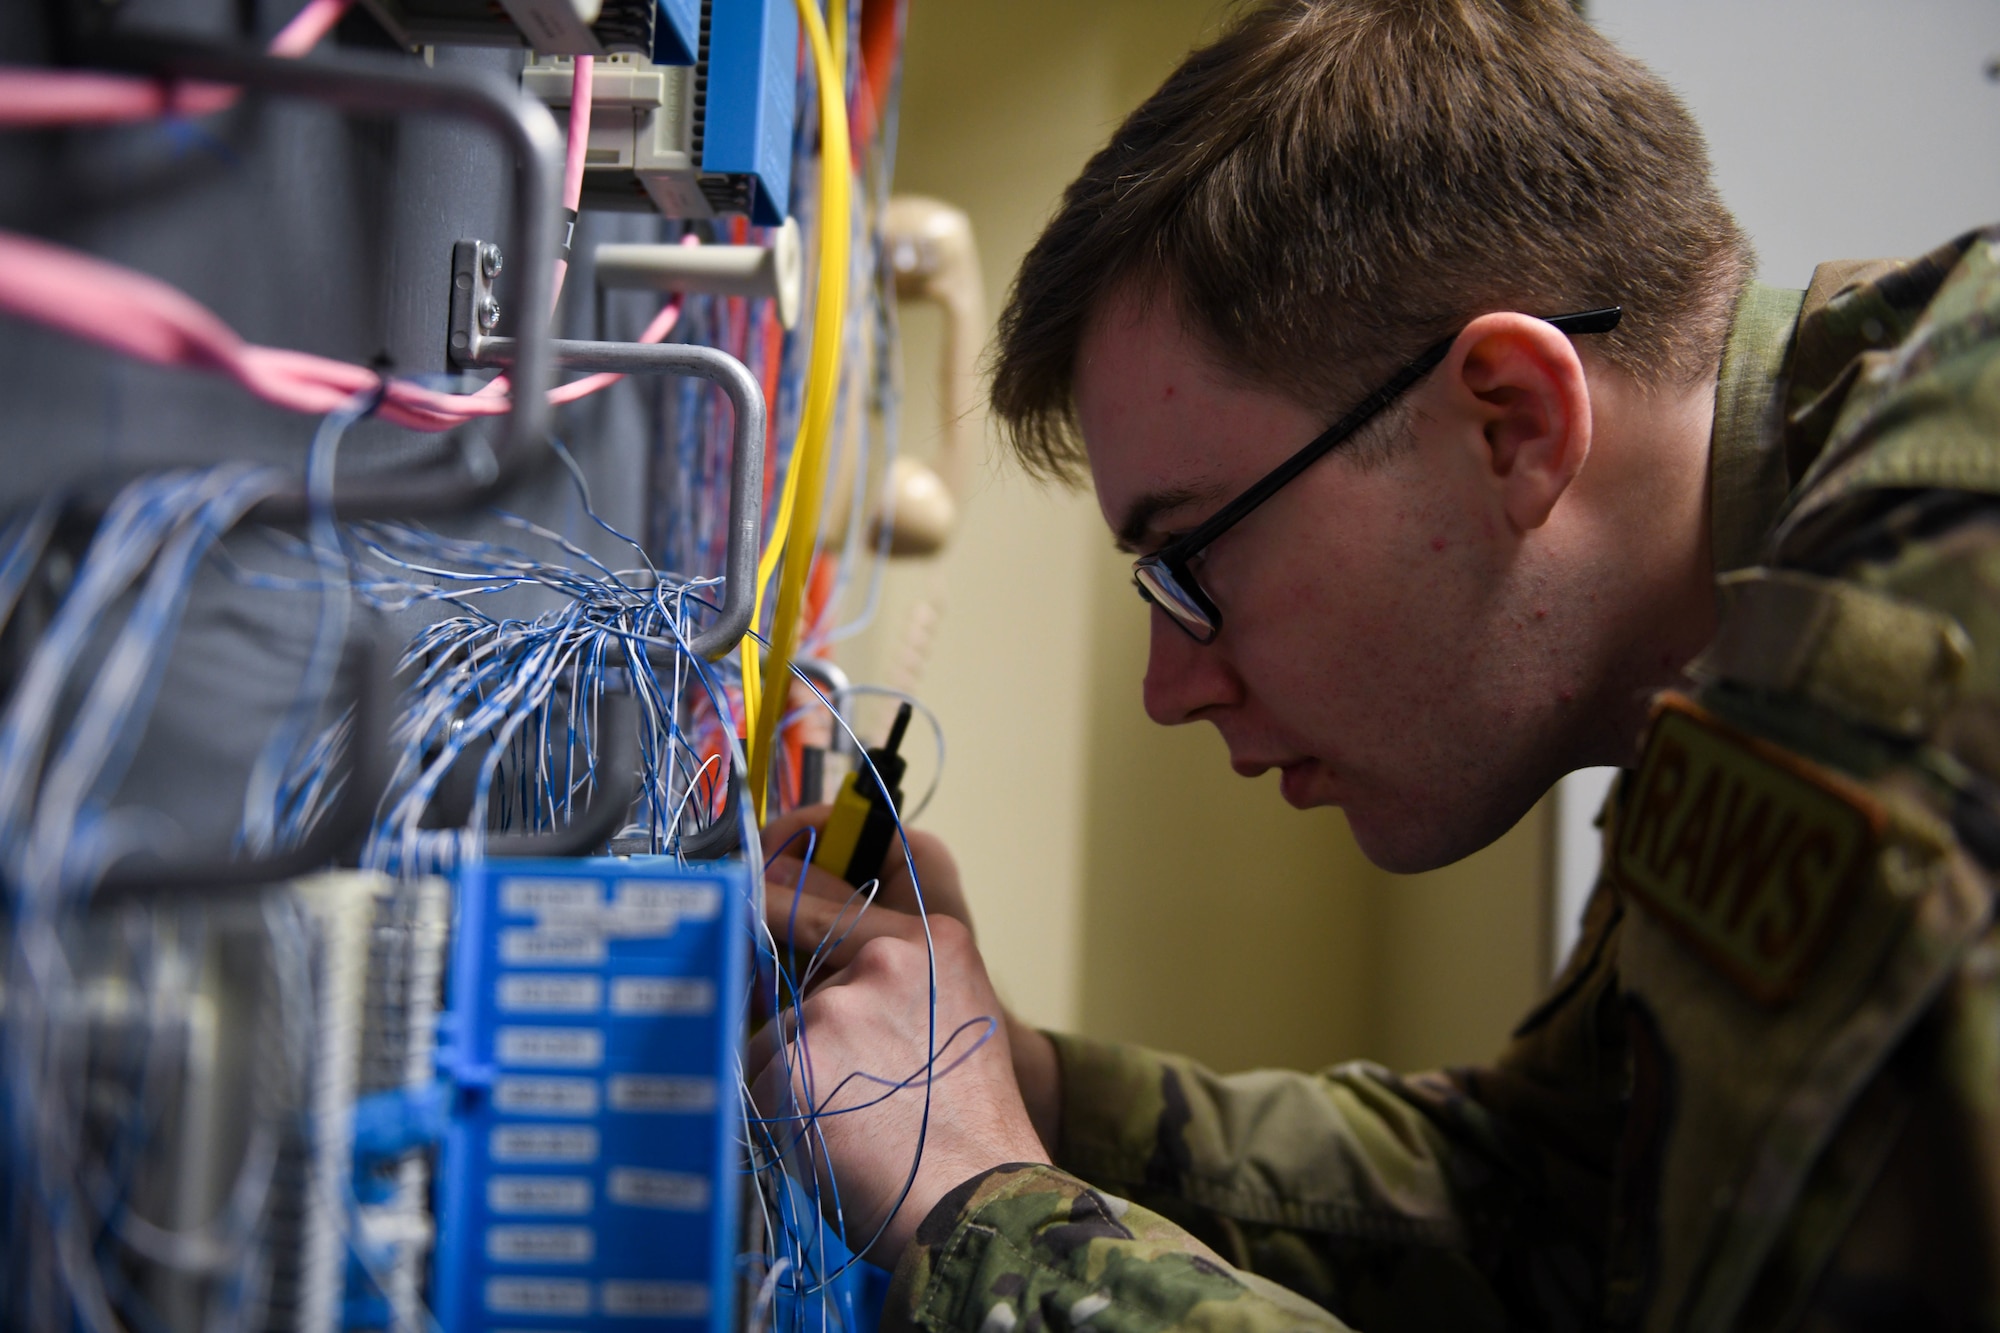 An airman with glasses connects wires.